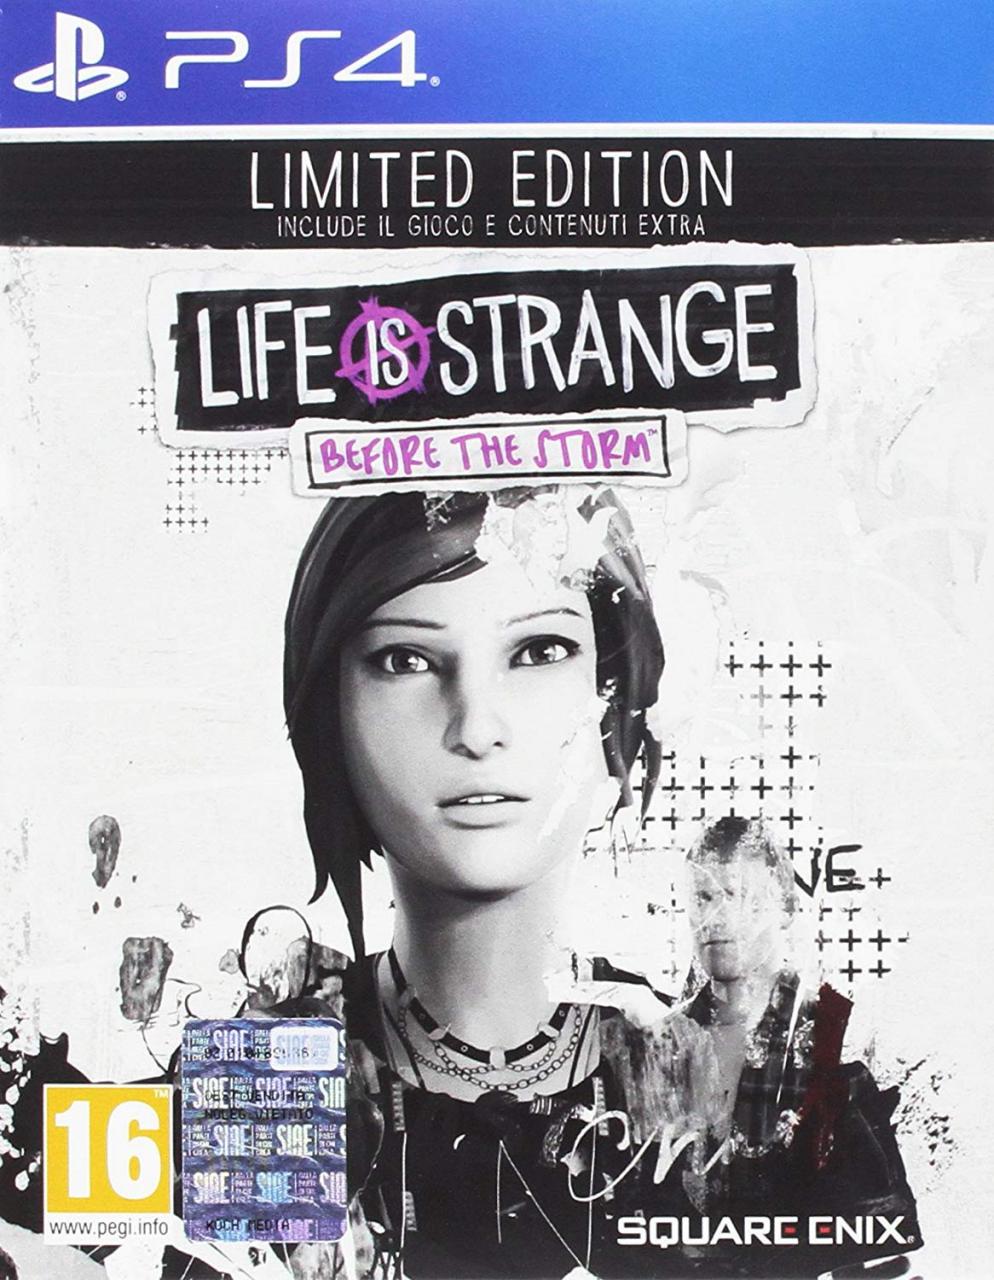 Juego PS4: Life Is Stranger Before the Storm (Edic.Limitada) solo 18,4€